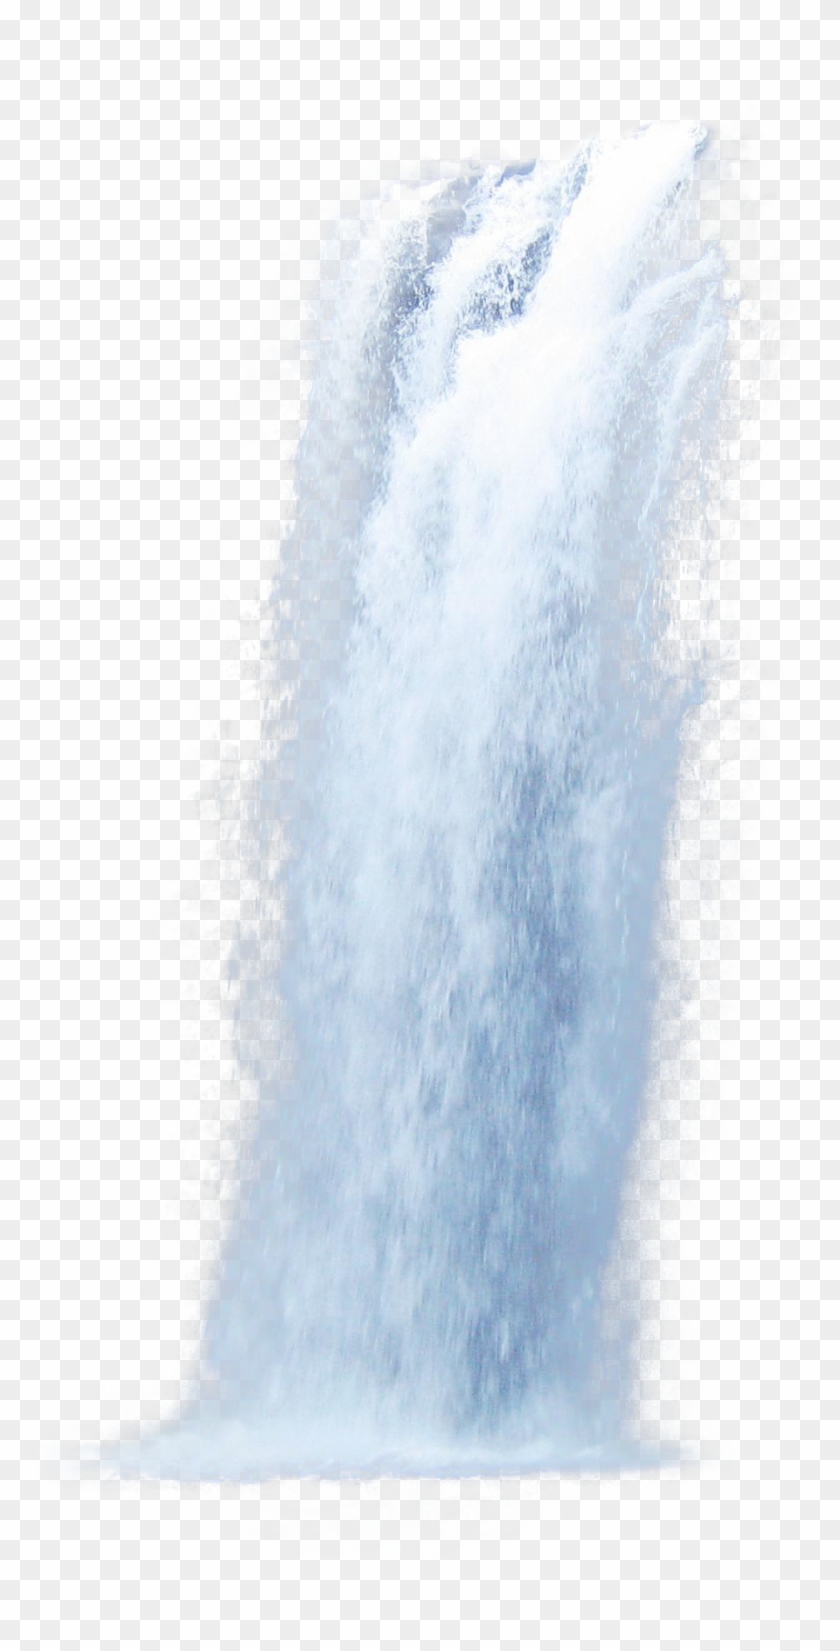 Waterfall Png Hd - Waterfall Transparent Clipart #528949